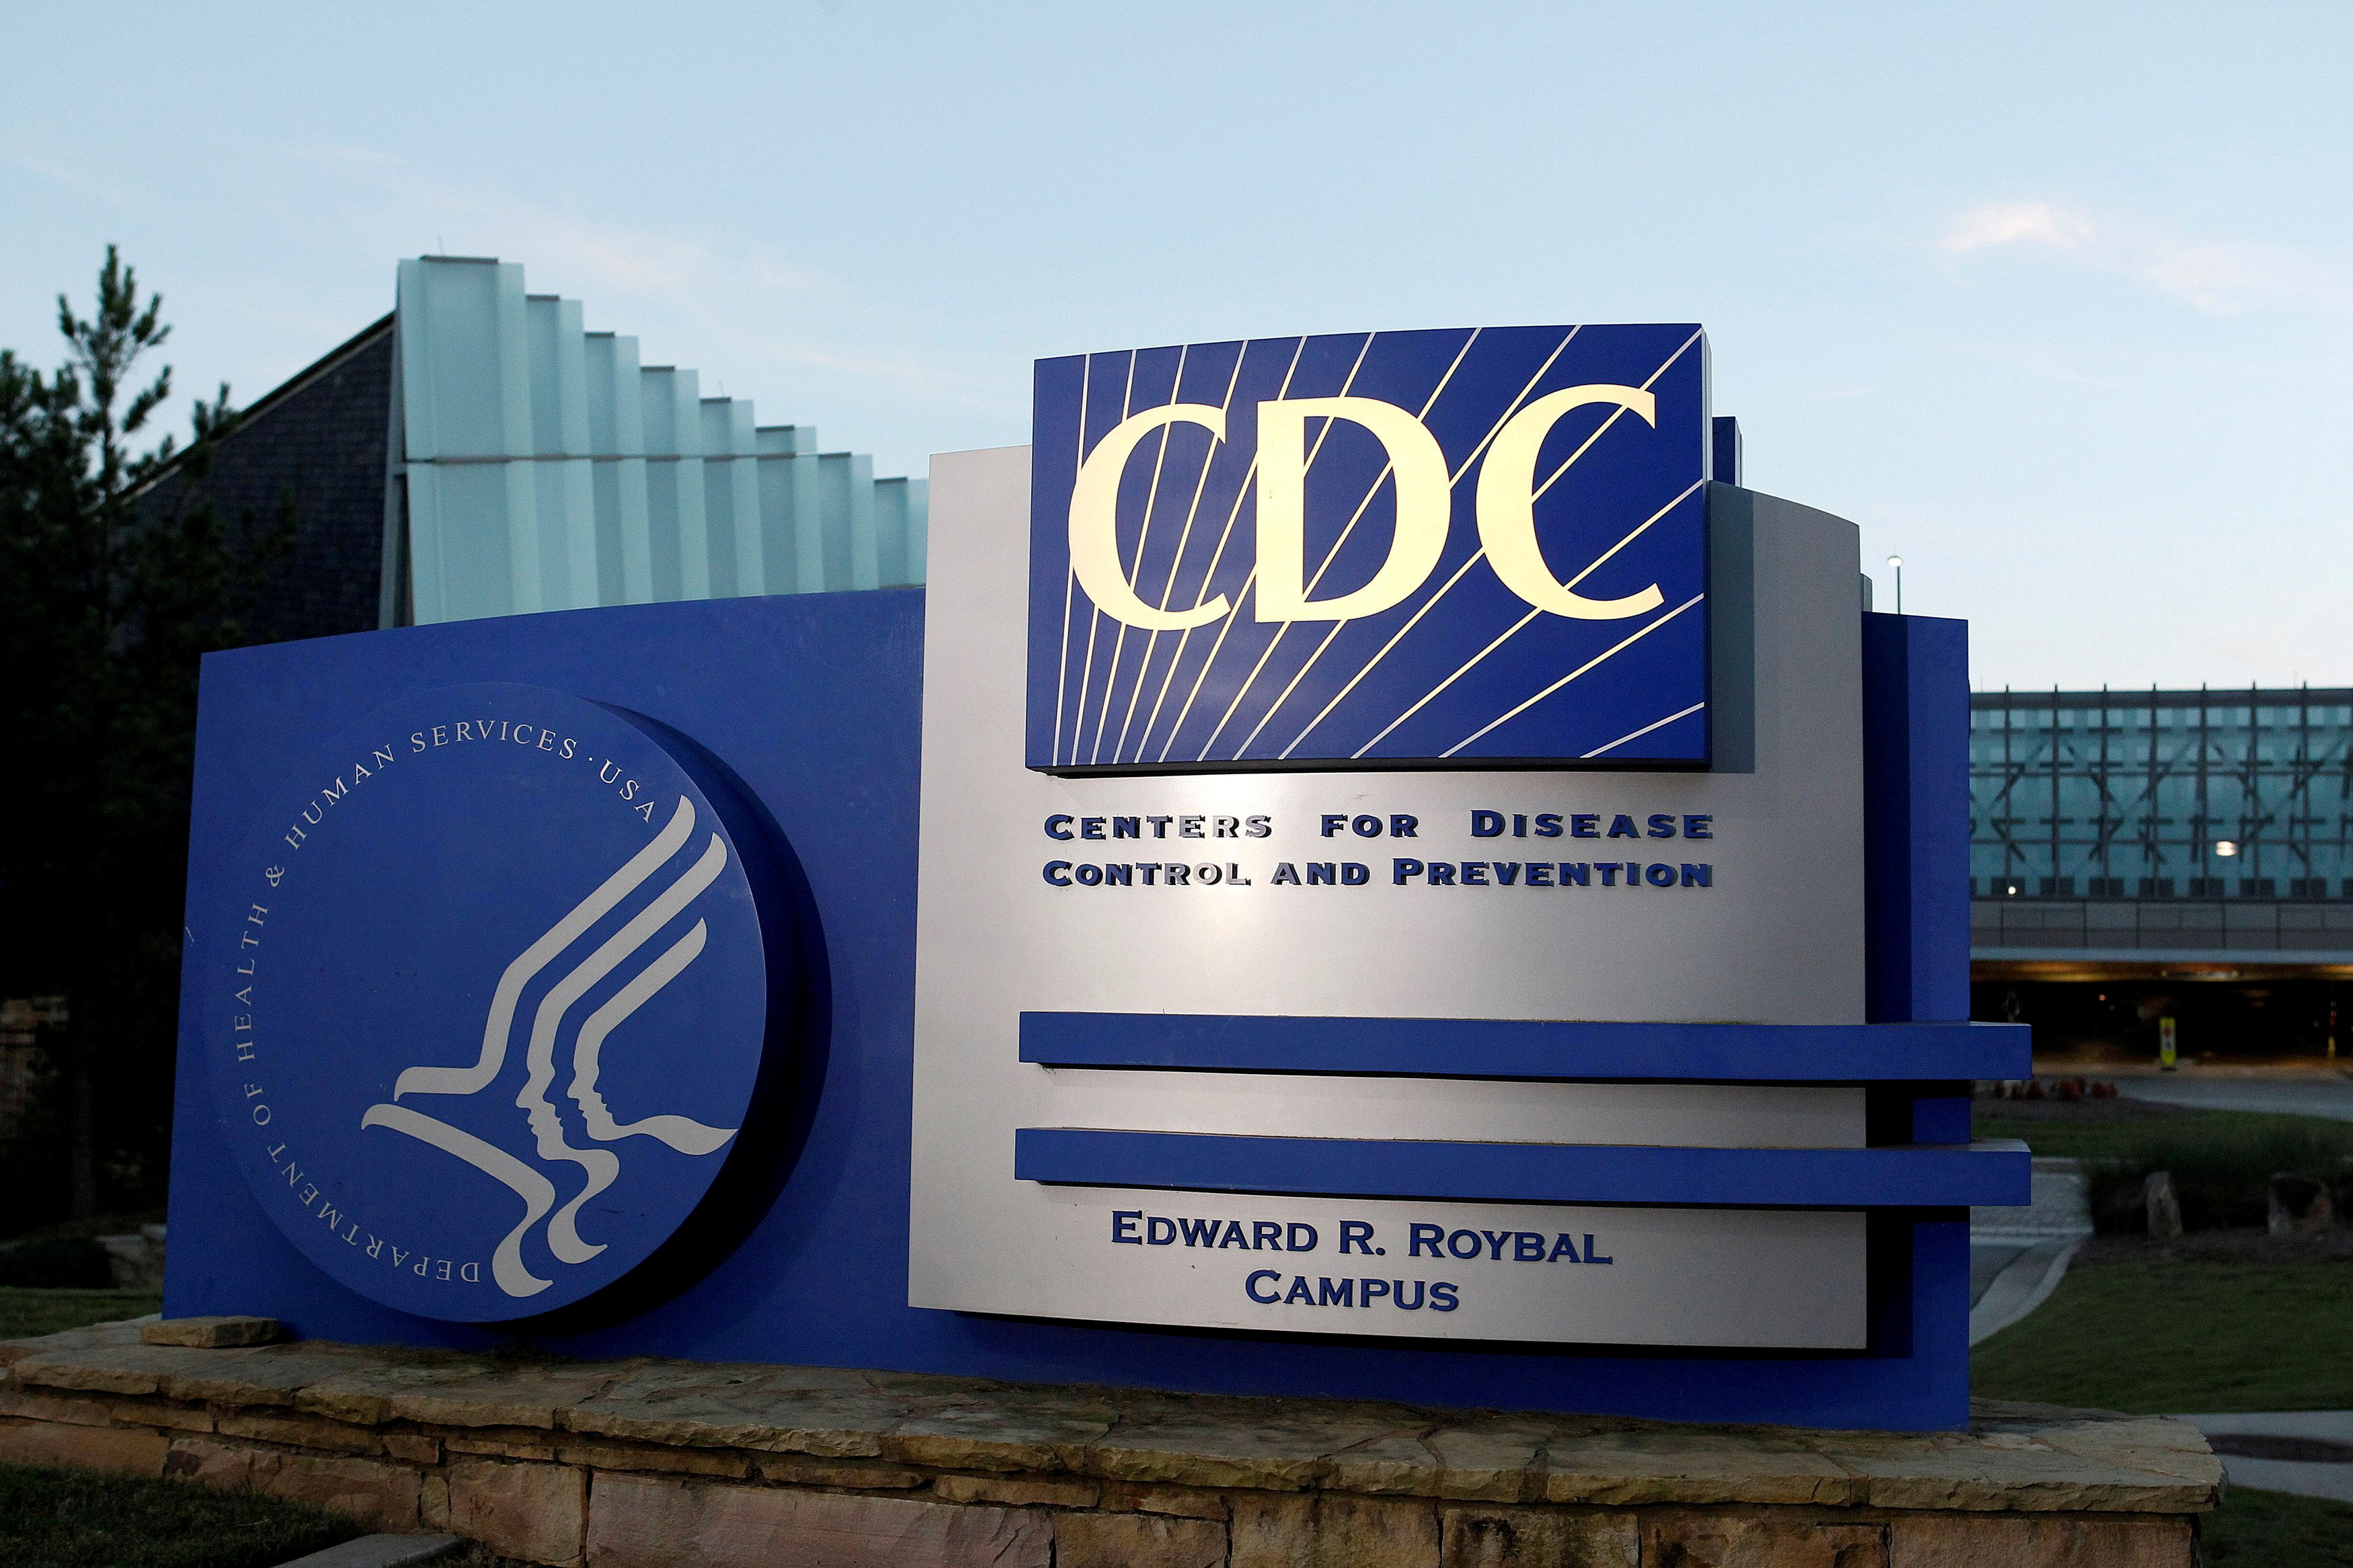 THE CDC ARE DELETING VAERS CASES BY THE THOUSAND EACH WEEK